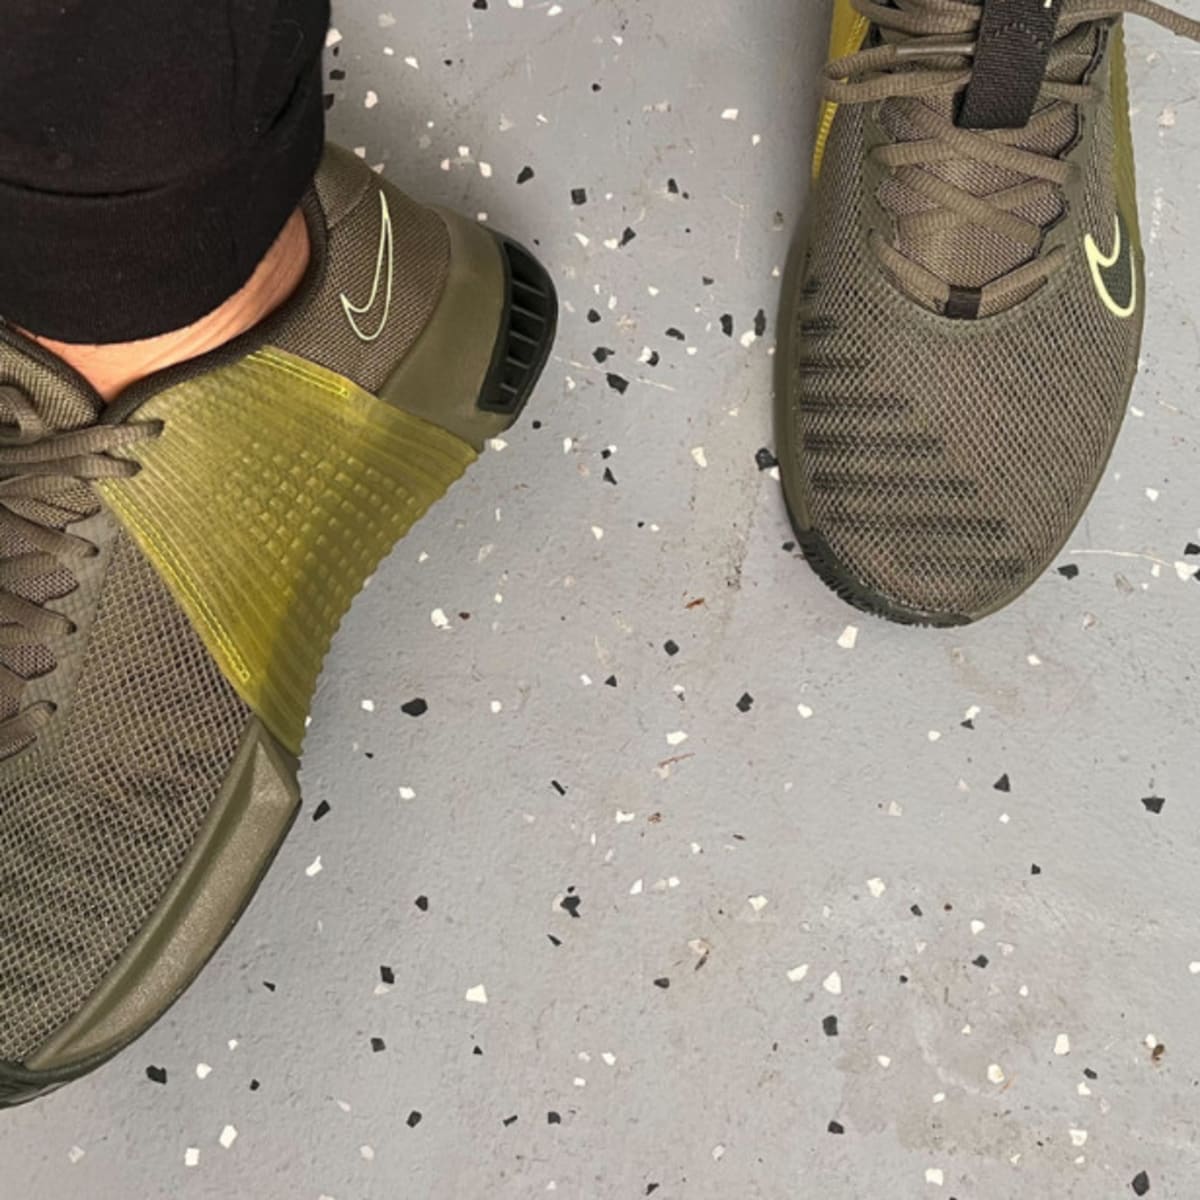 Nike Metcon 9 Full Review: 5 Reasons it Will Take Your Training to